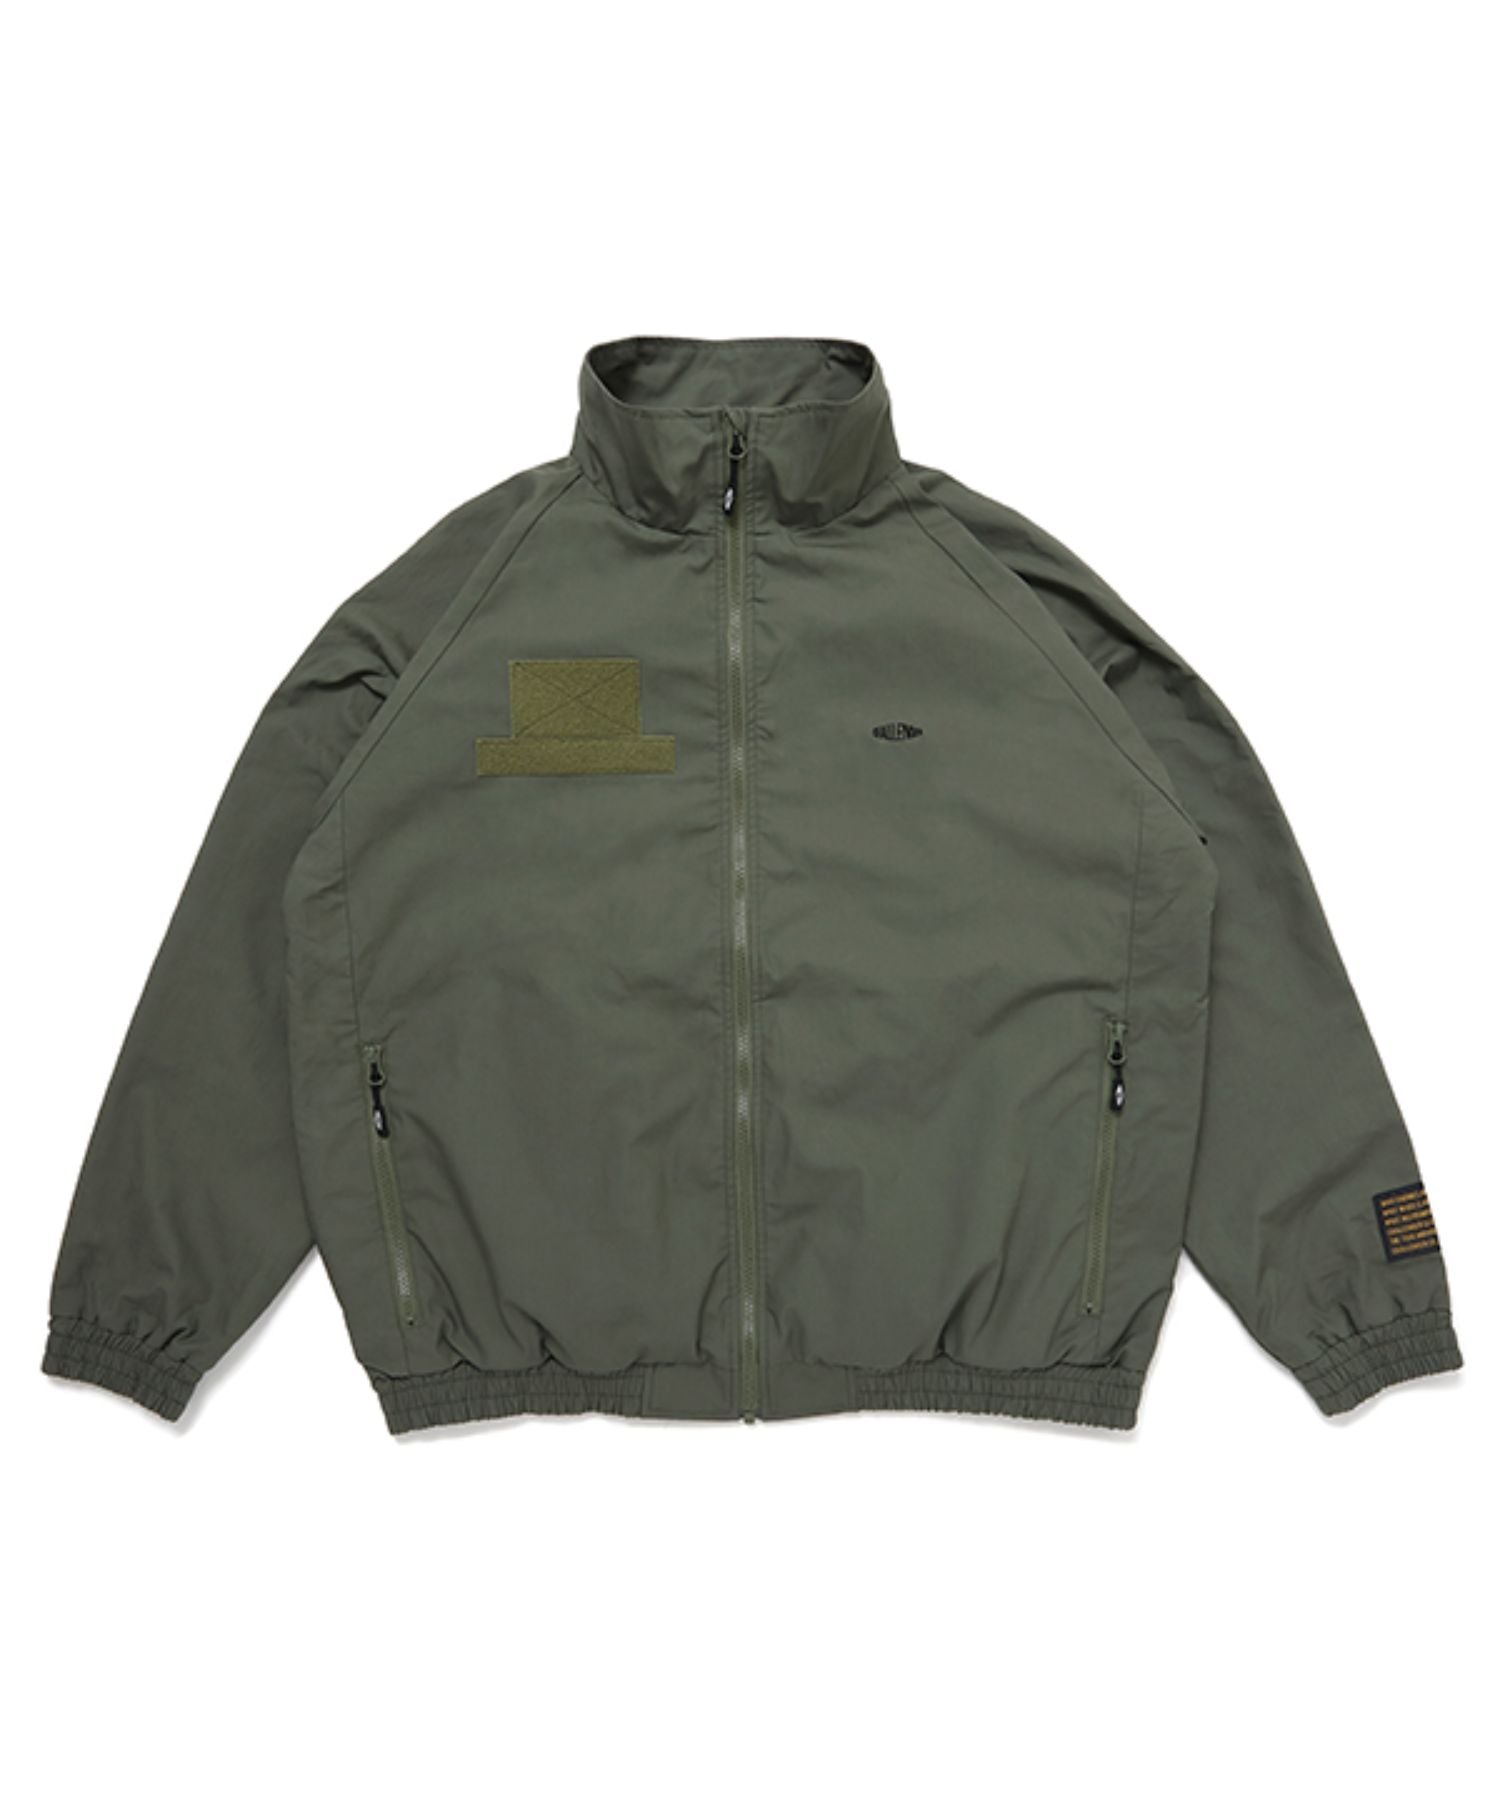 M CHALLENGER MILITARY WARM UP JACKET-